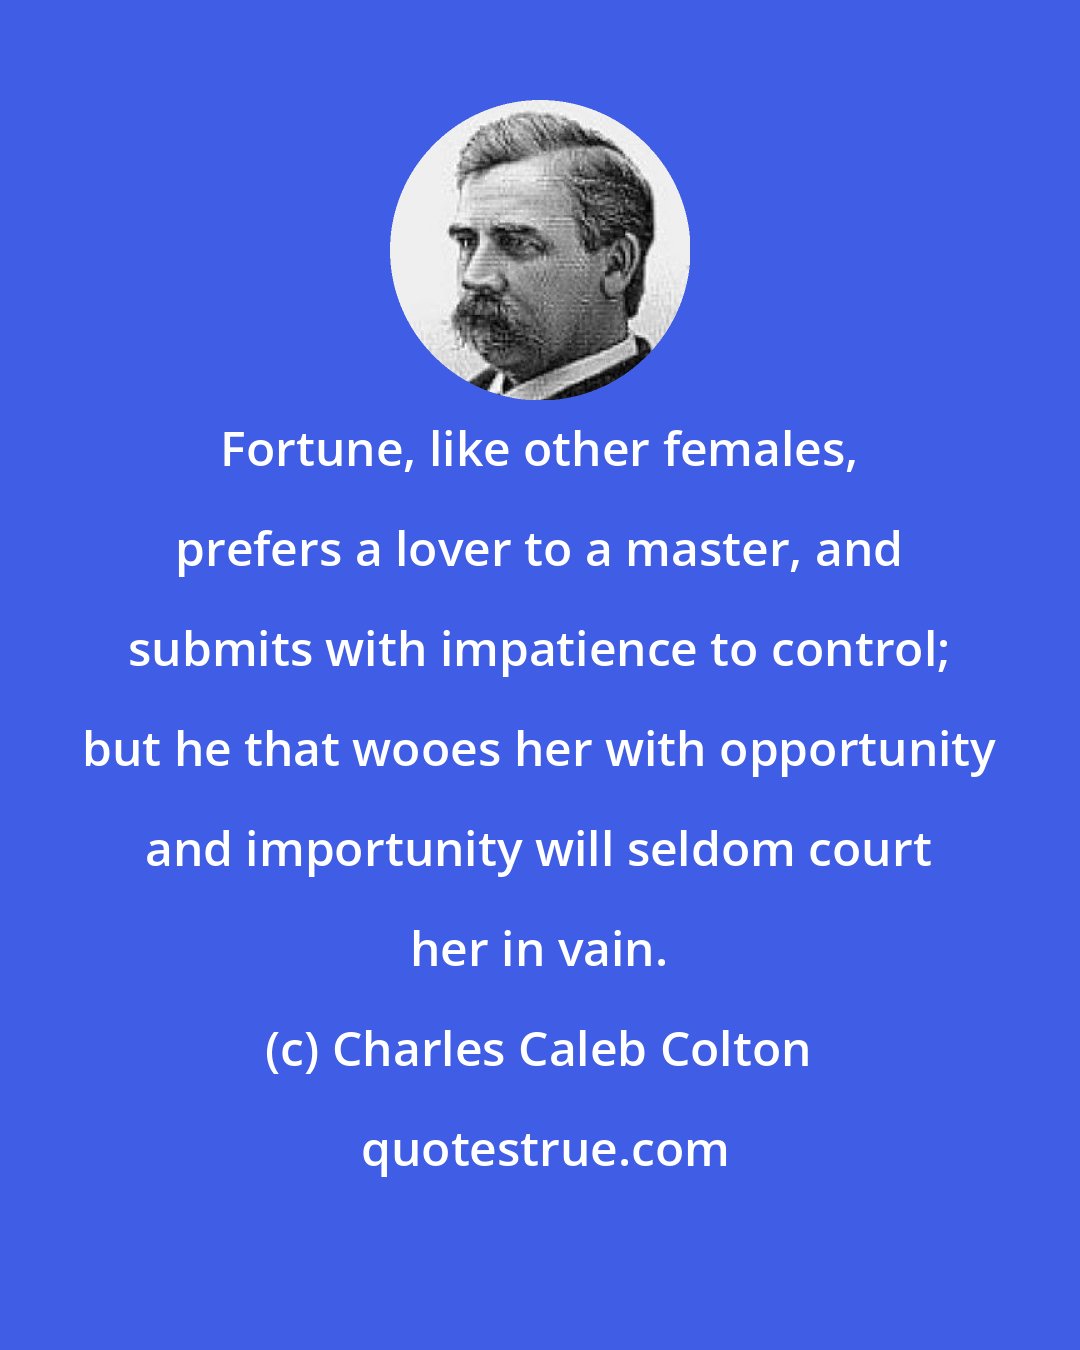 Charles Caleb Colton: Fortune, like other females, prefers a lover to a master, and submits with impatience to control; but he that wooes her with opportunity and importunity will seldom court her in vain.